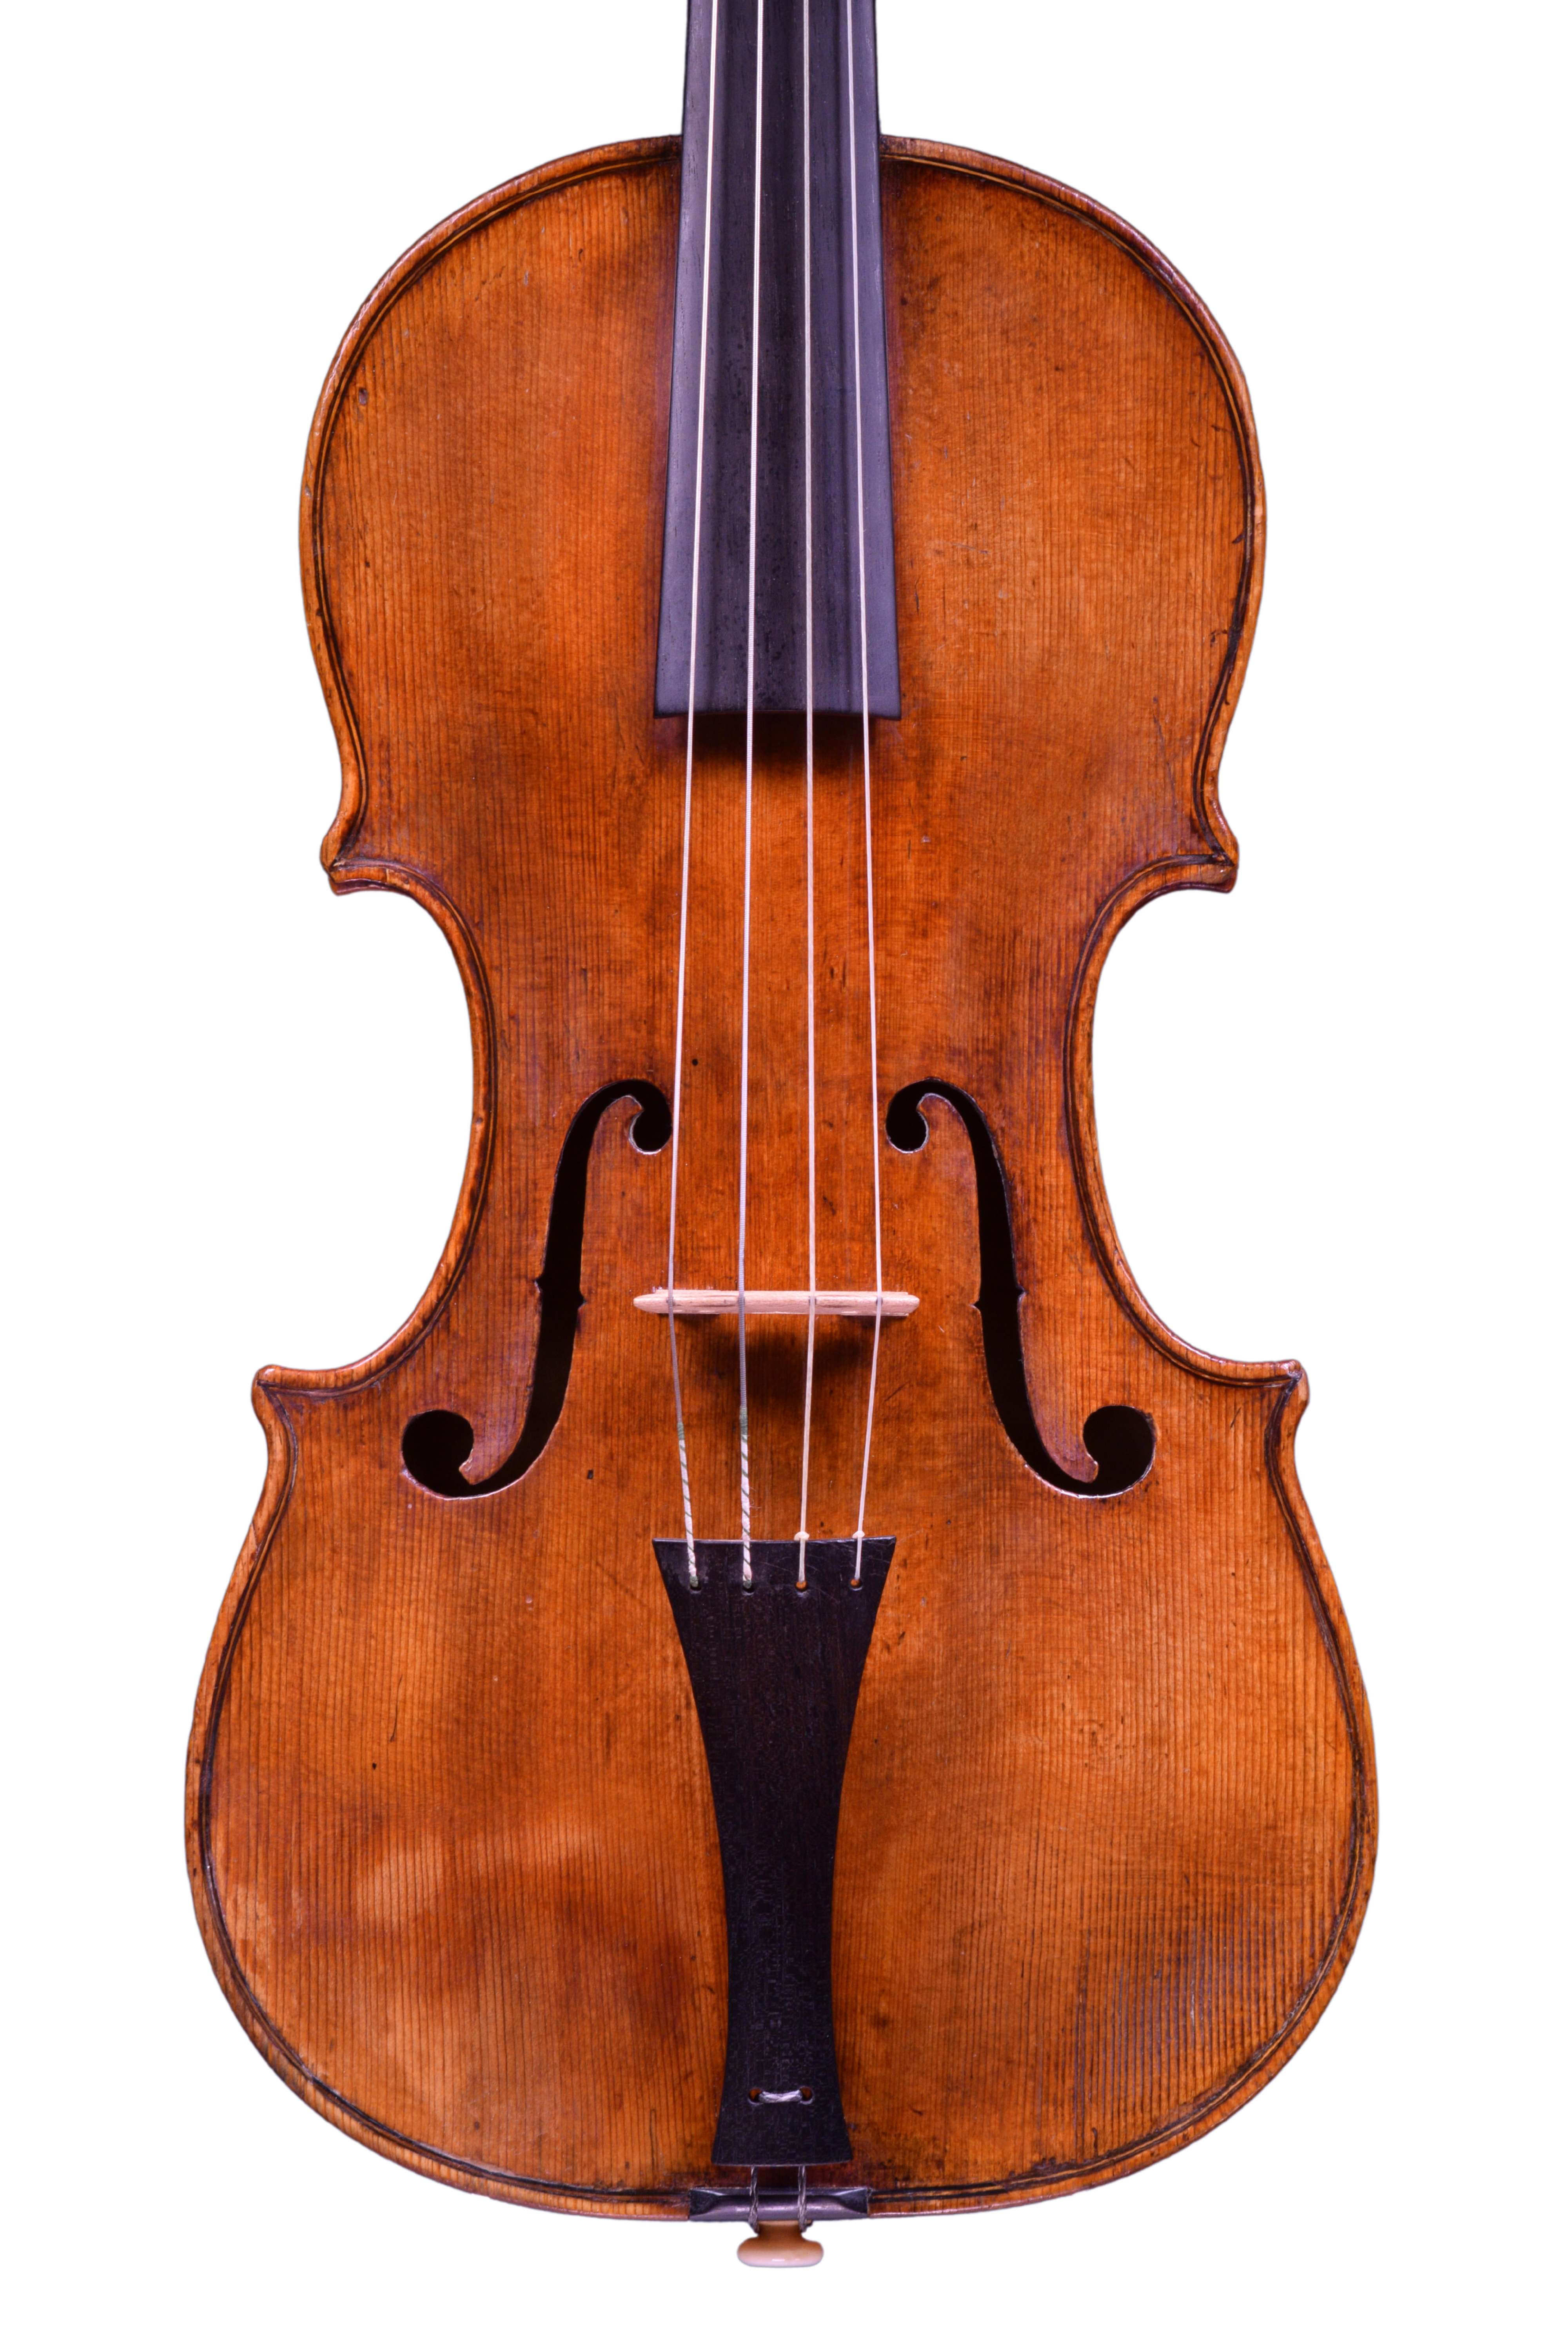 Find out more about this incredible violin, made in Treviso circa 1750